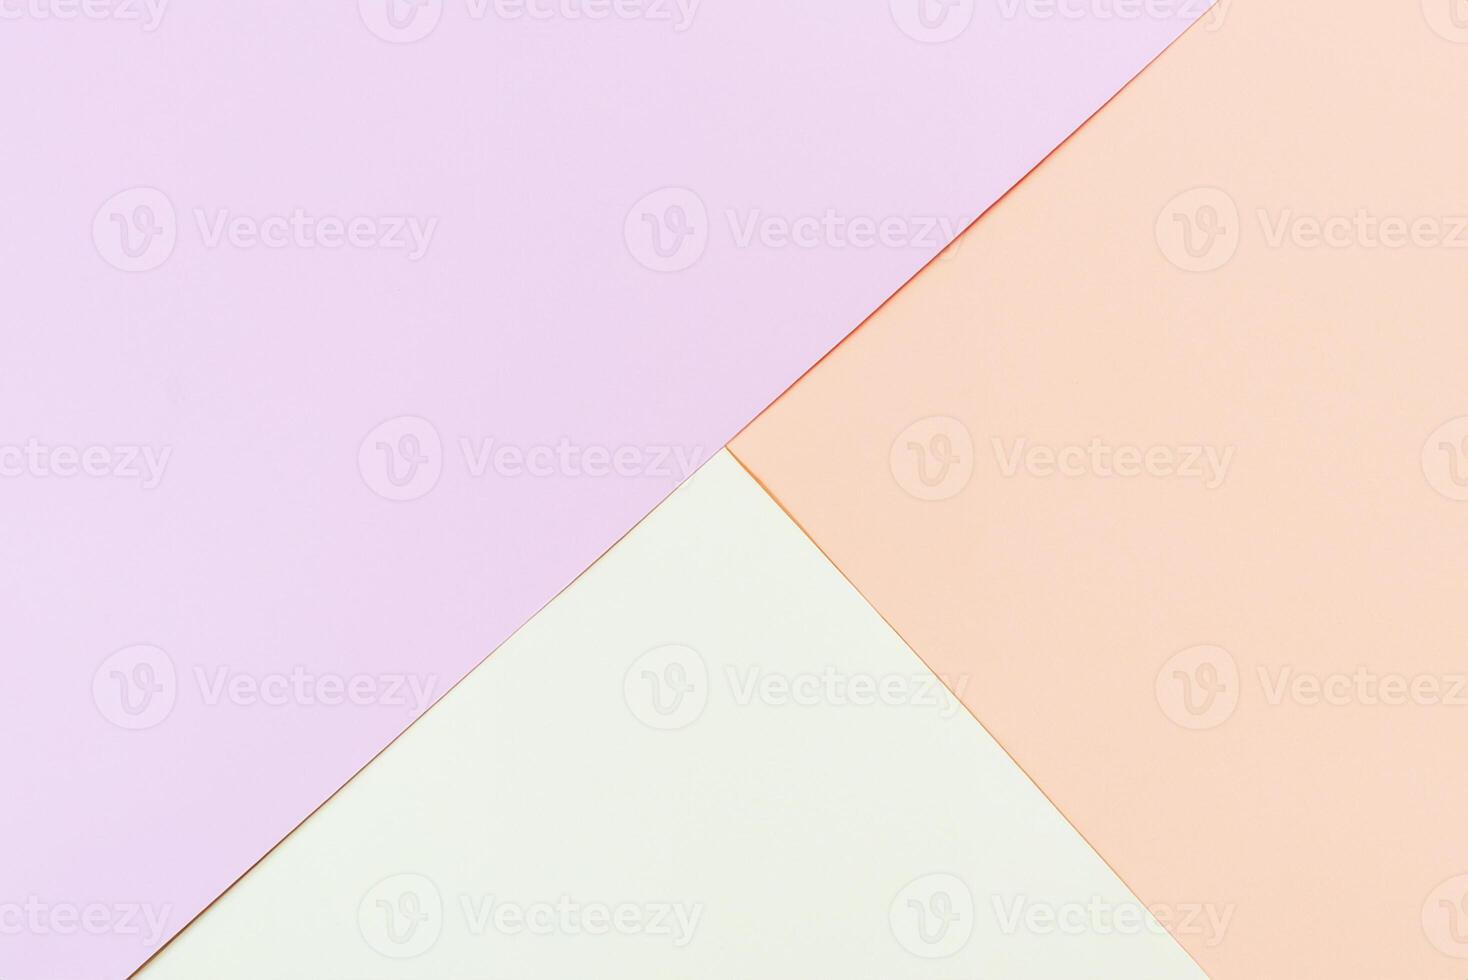 Soft Pastel Palette, Beige, Pink, Yellow, and More. photo